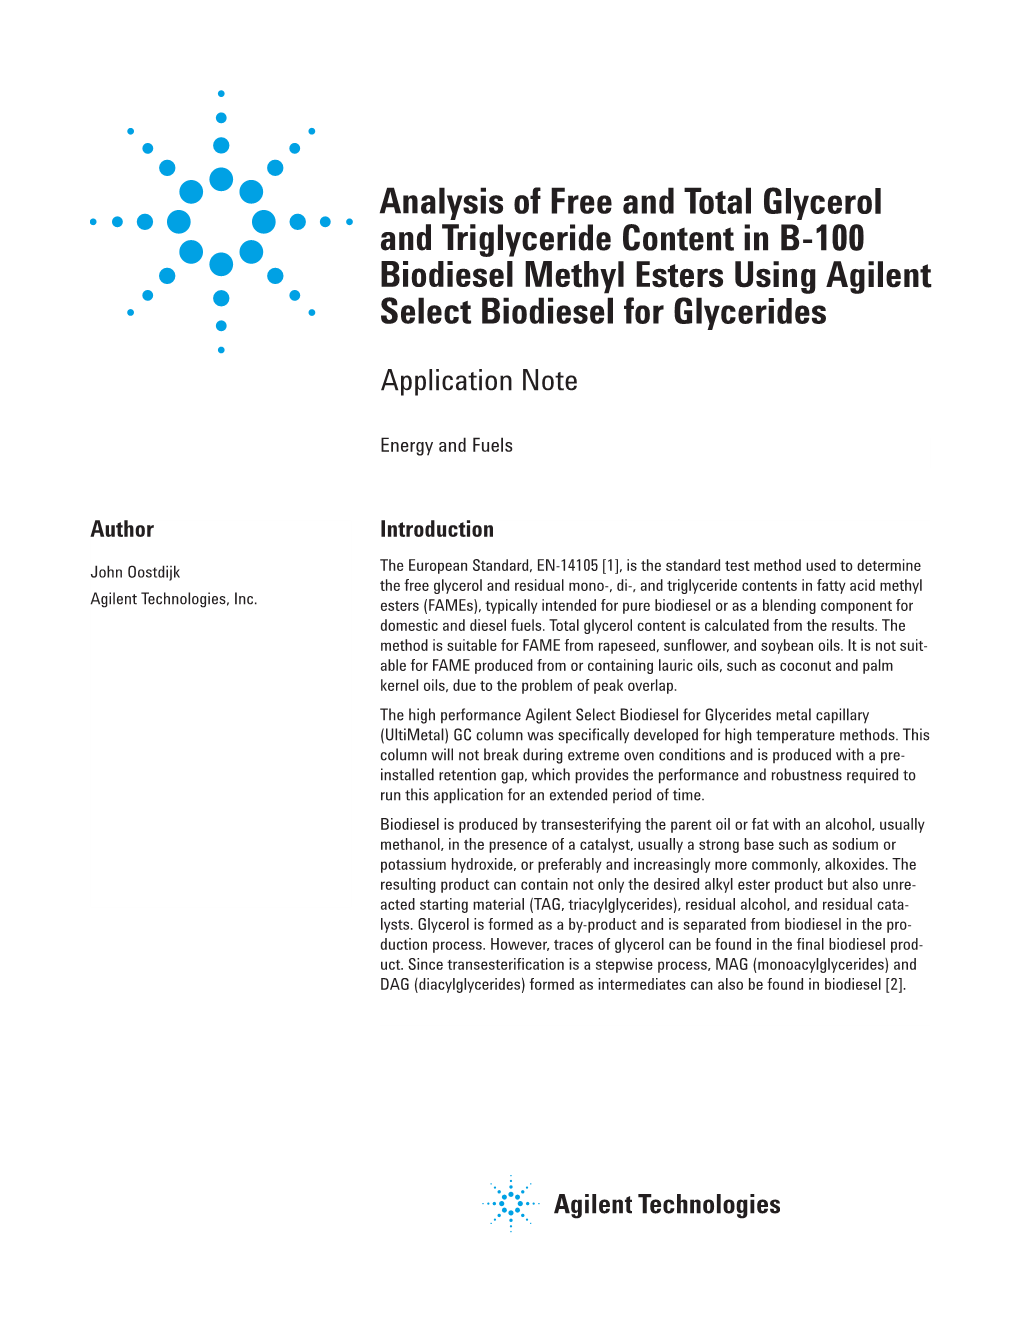 Analysis of Free and Total Glycerol and Triglyceride Content in B-100 Biodiesel Methyl Esters Using Agilent Select Biodiesel for Glycerides